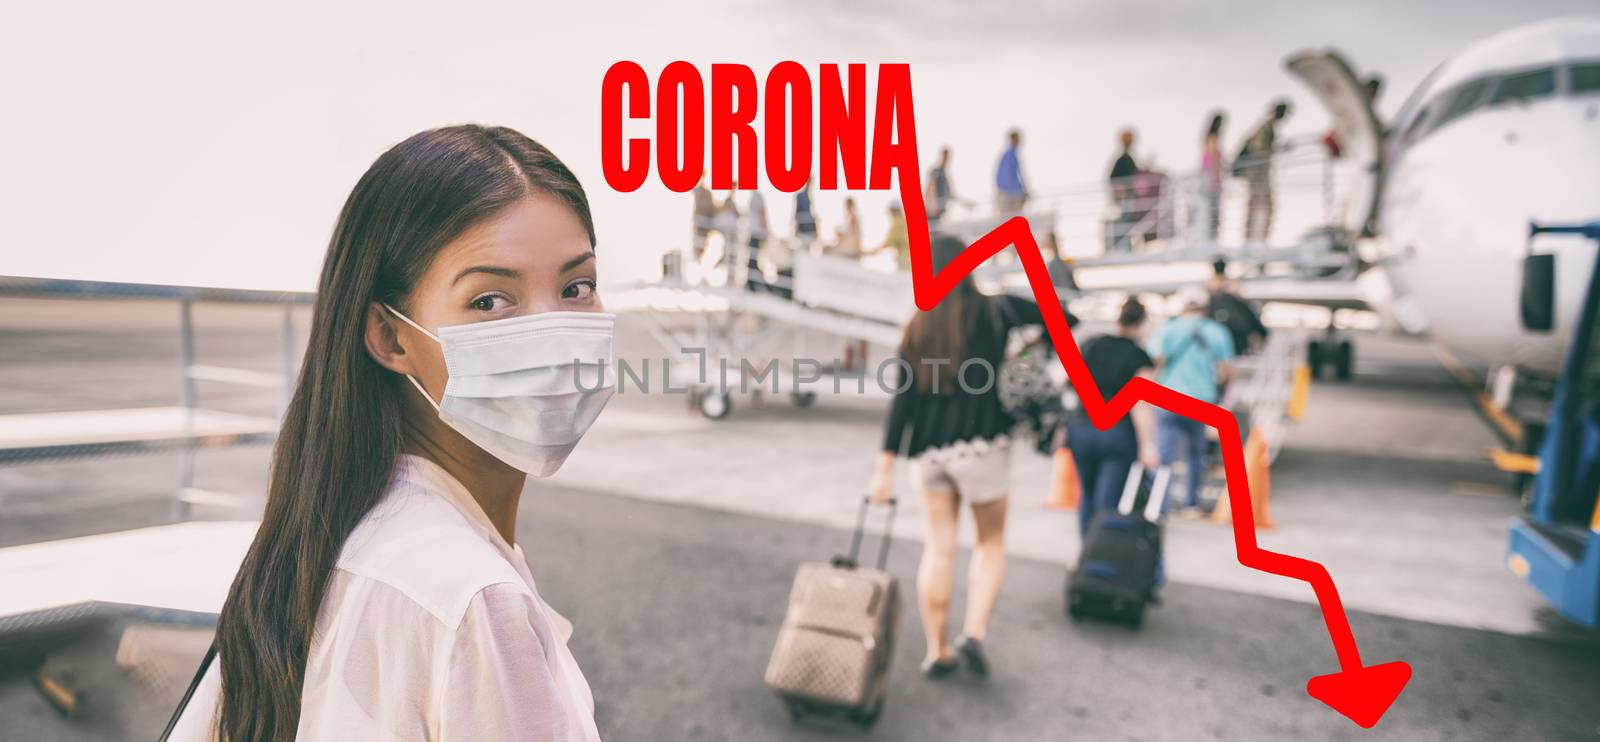 Coronavirus crashing stock market causing new financial crisis and bear market recession and economic downturn. Woman wearing surgical mask for corona virus going on plane by negative graph of stocks. by Maridav